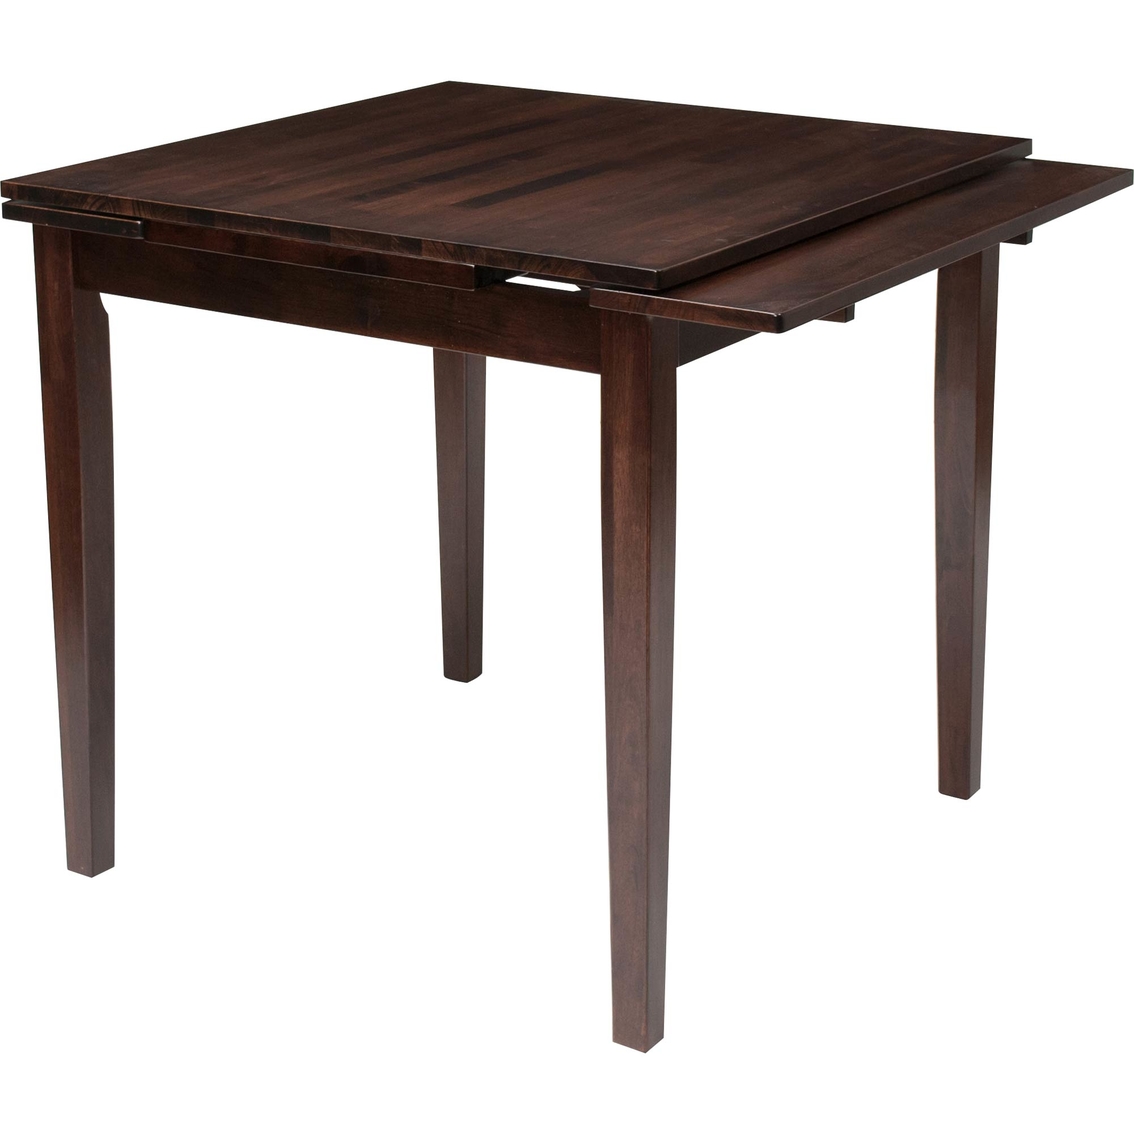 CorLiving Dillon Extendable Dining Table with Two 8 in. Leaves - Image 2 of 4